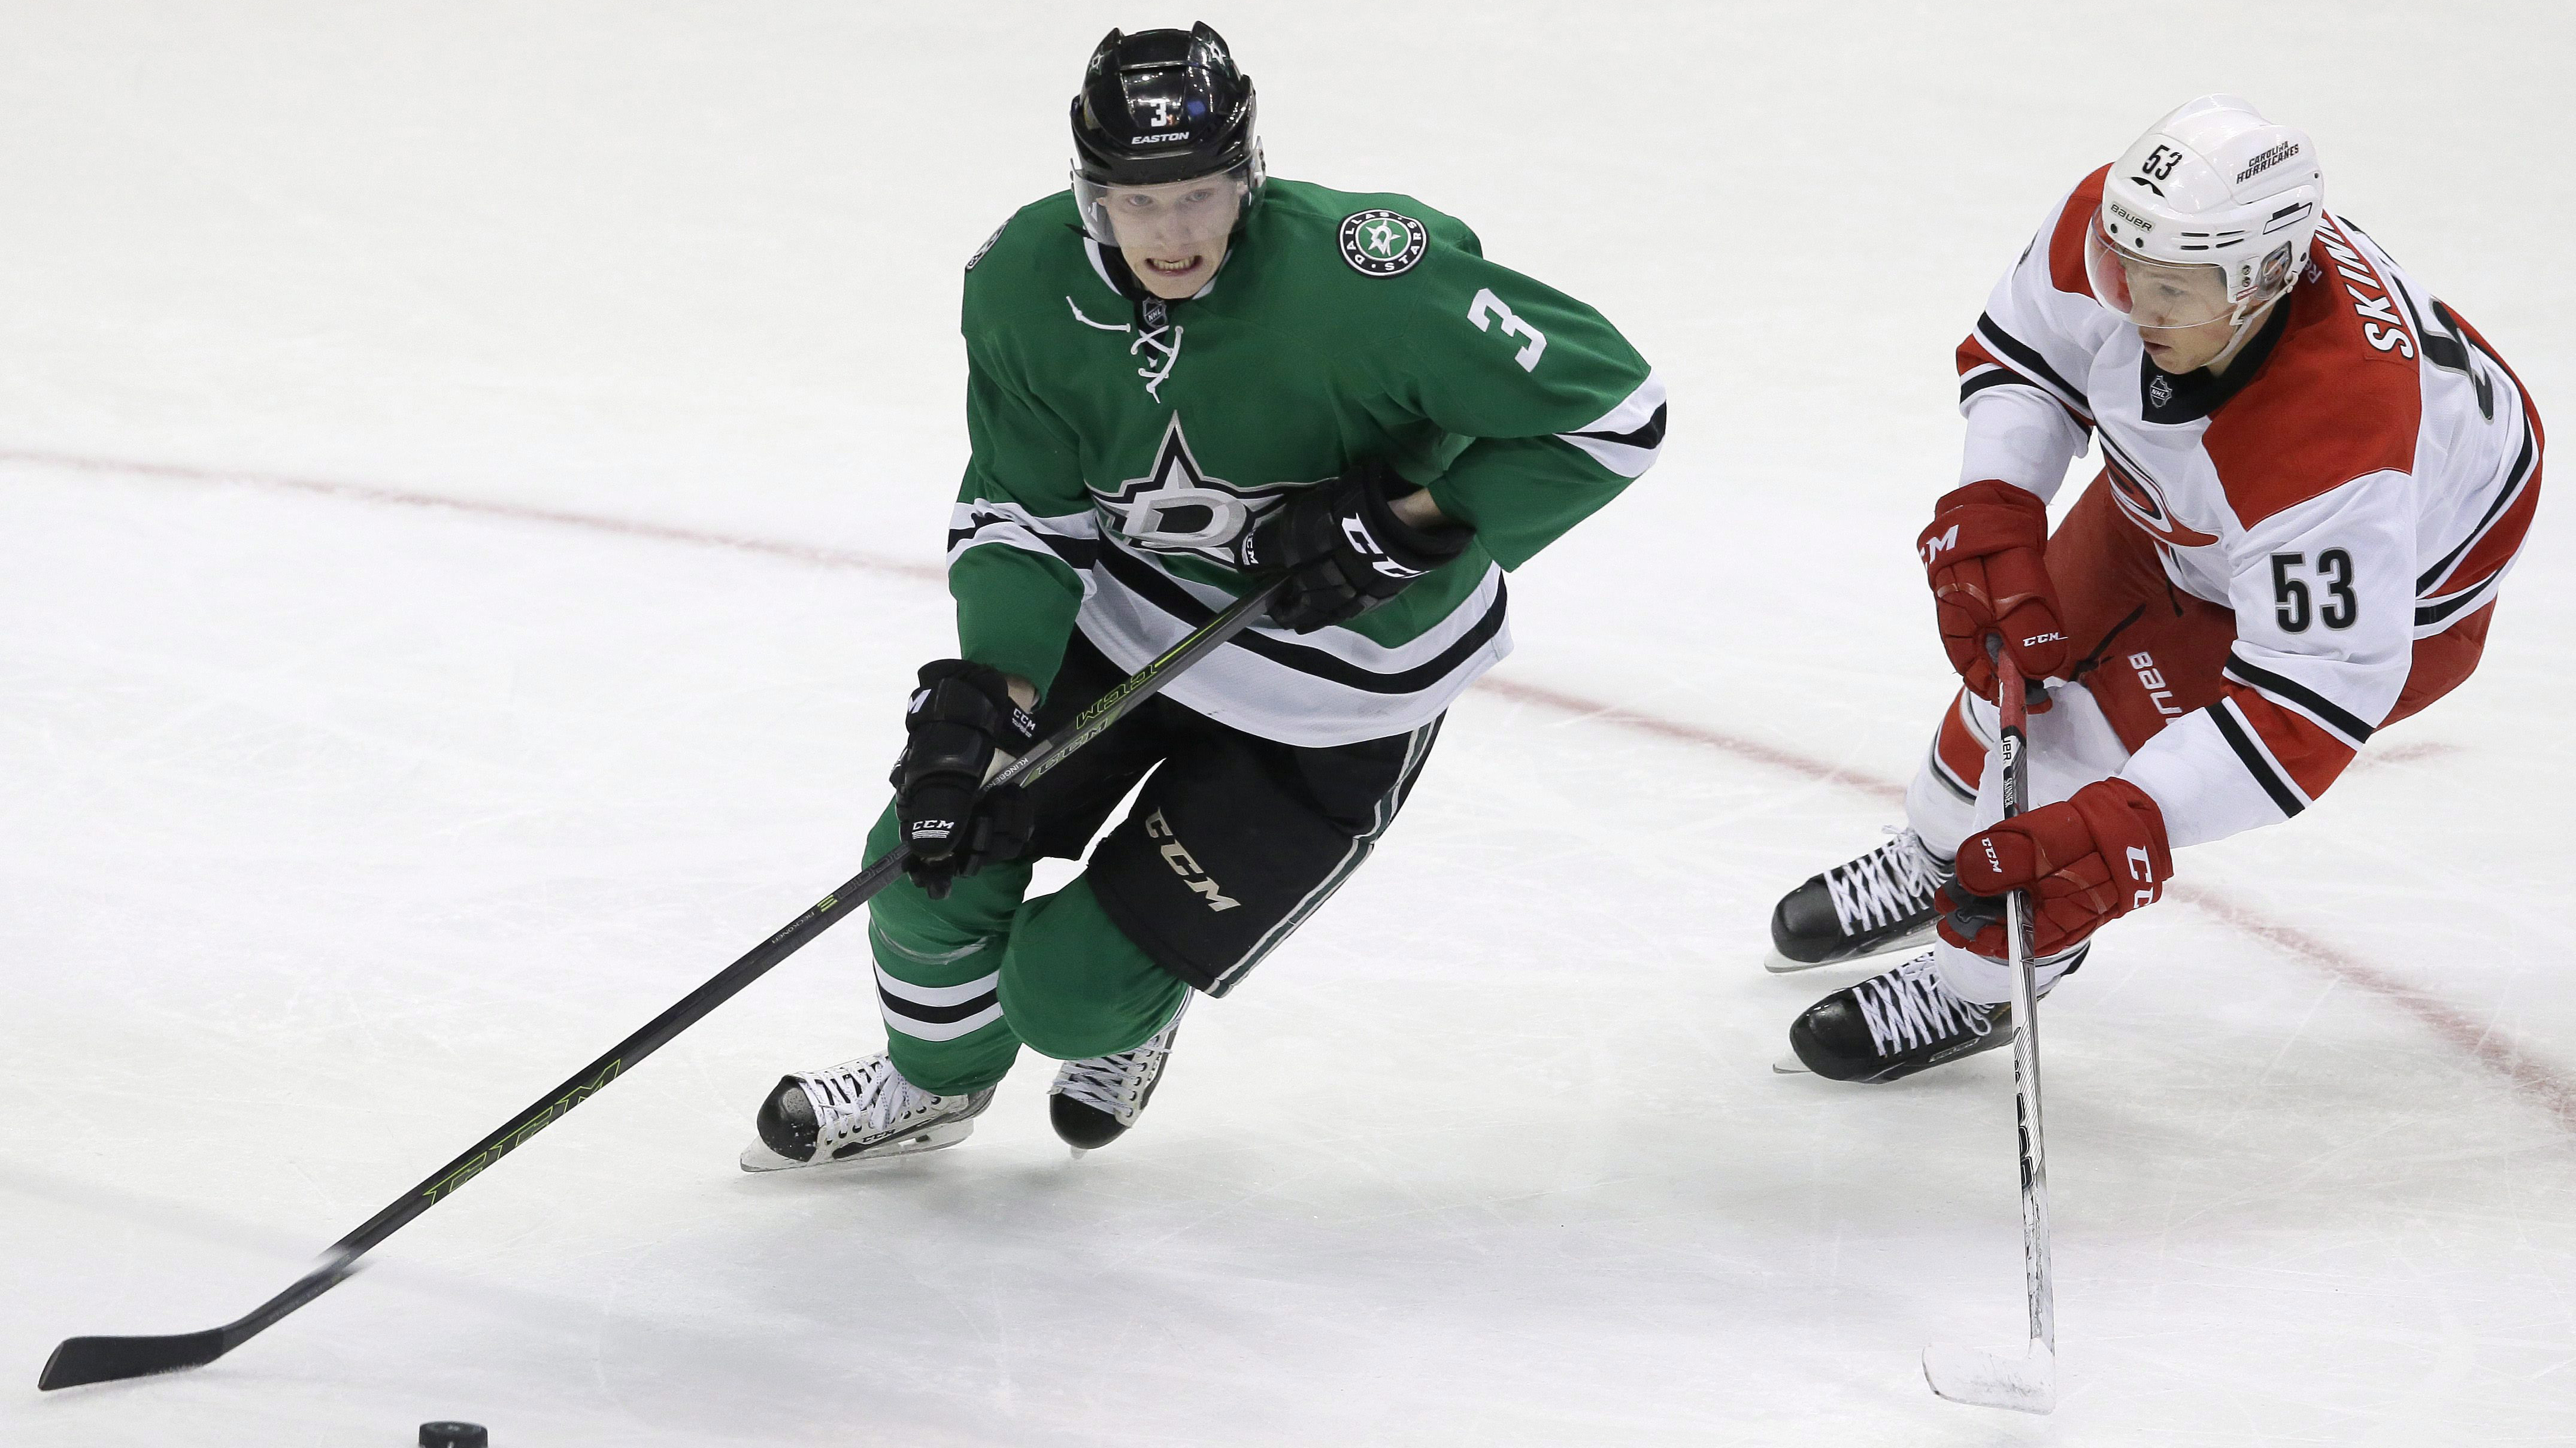 Stars defenceman John Klingberg (3) skates with the puck against Hurricanes left wing Jeff Skinner (53), both players have yet to play in the NHL playoffs. (LM Otero/AP)